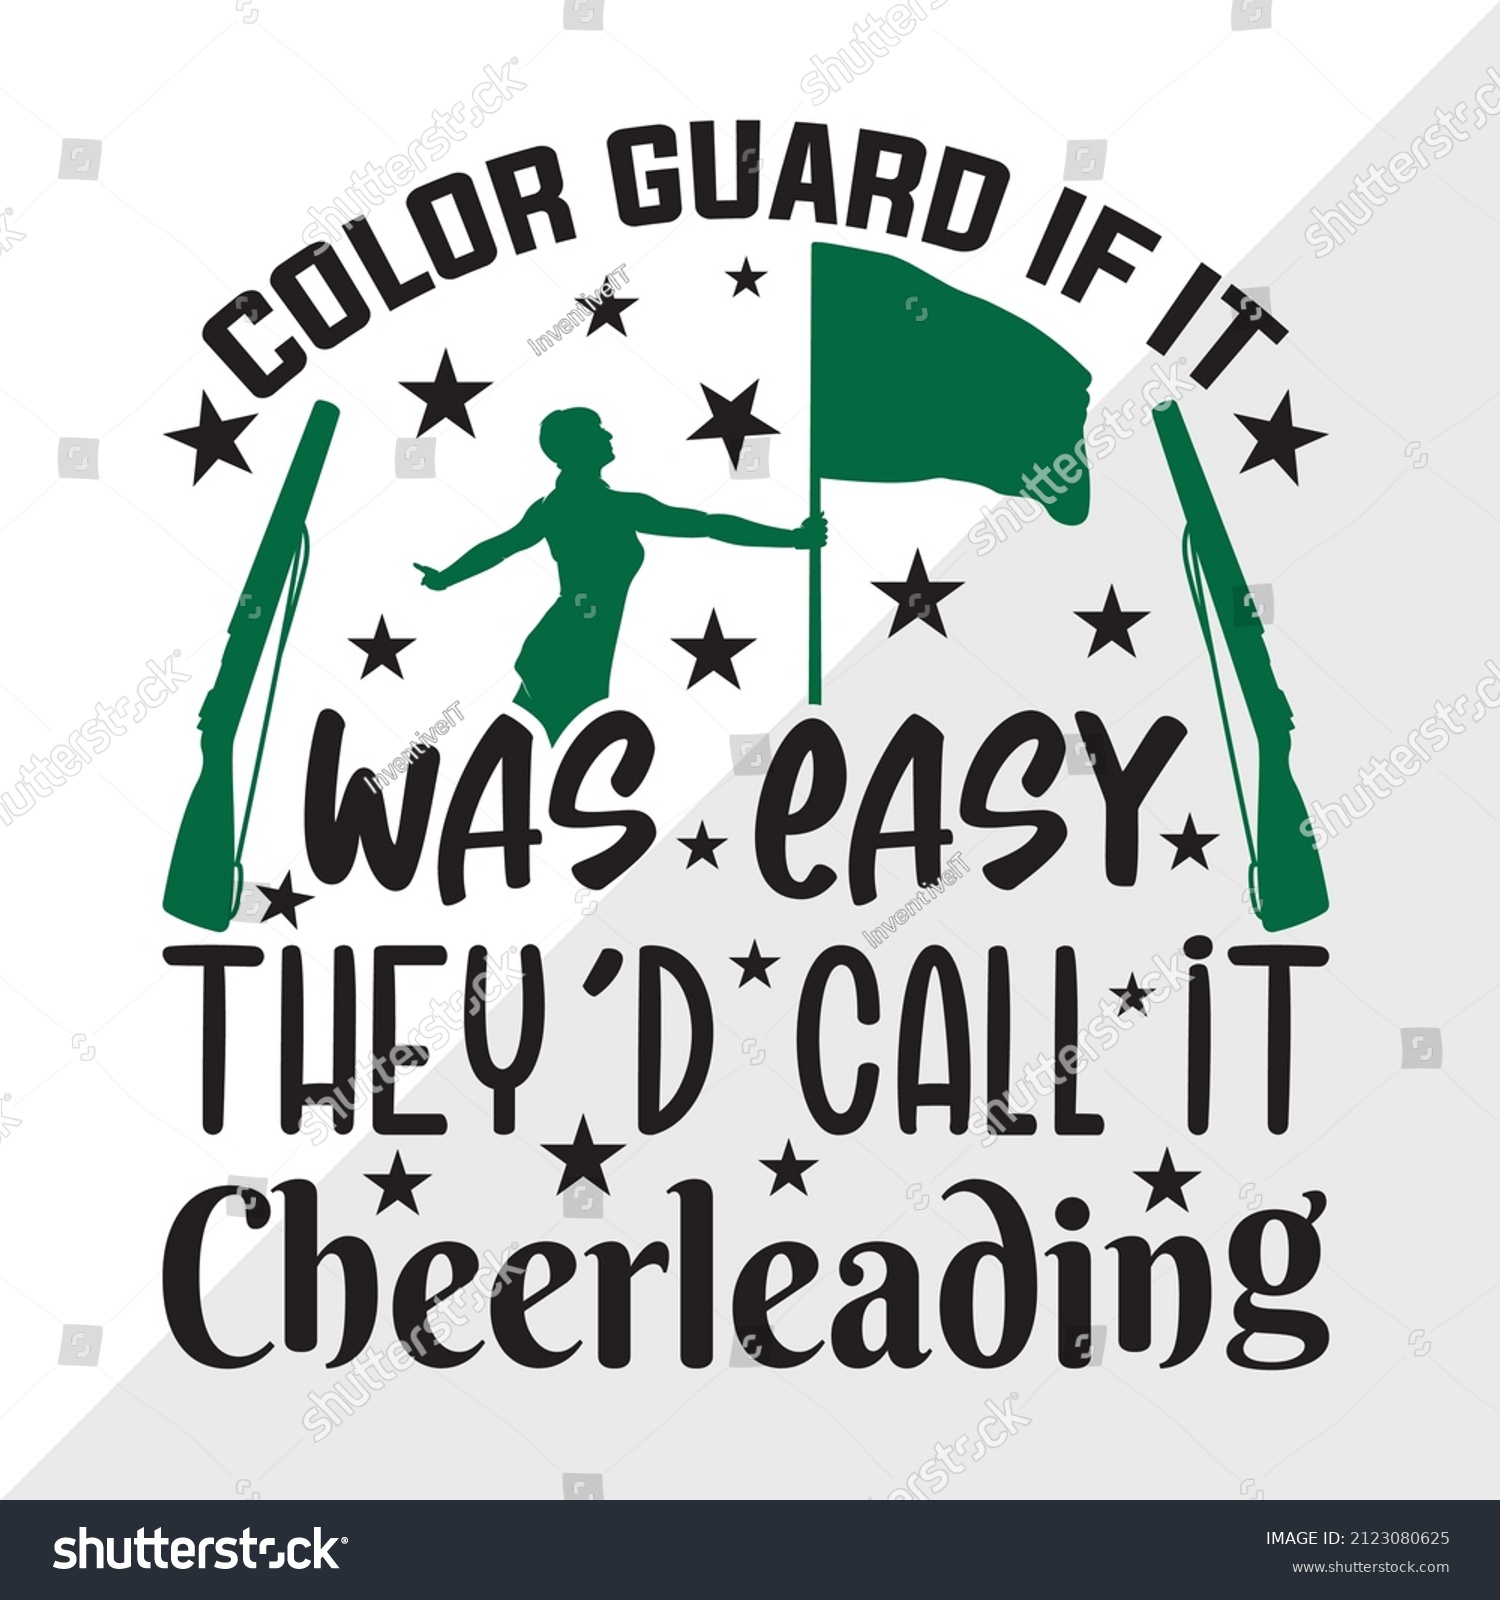 SVG of Color Guard If It Was Easy They'd Call It Cheerleading Printable vector illustration svg